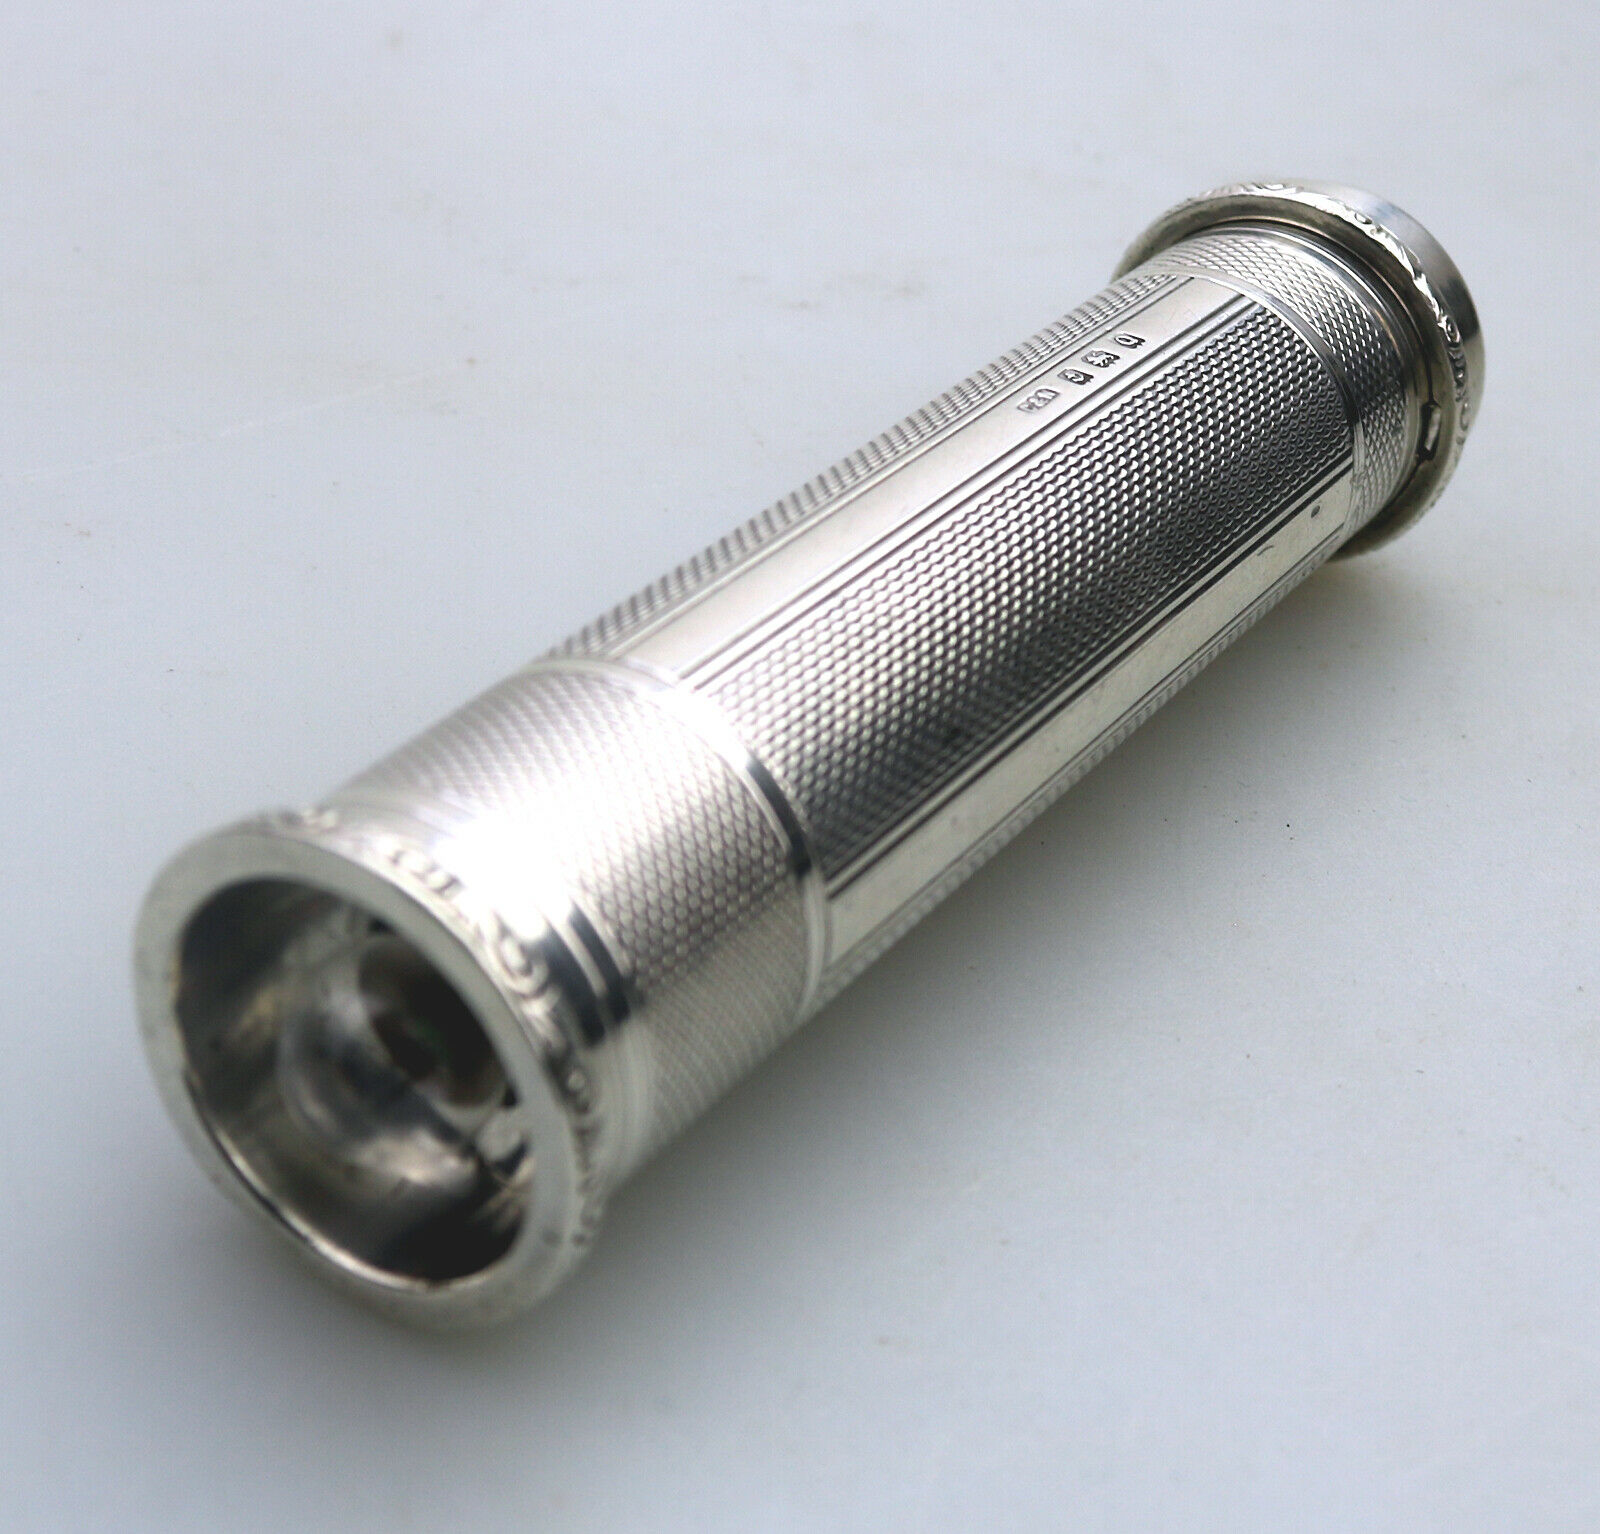 A WWII Era Blitz / Doctors solid silver Torch C.1940 - Image 3 of 5